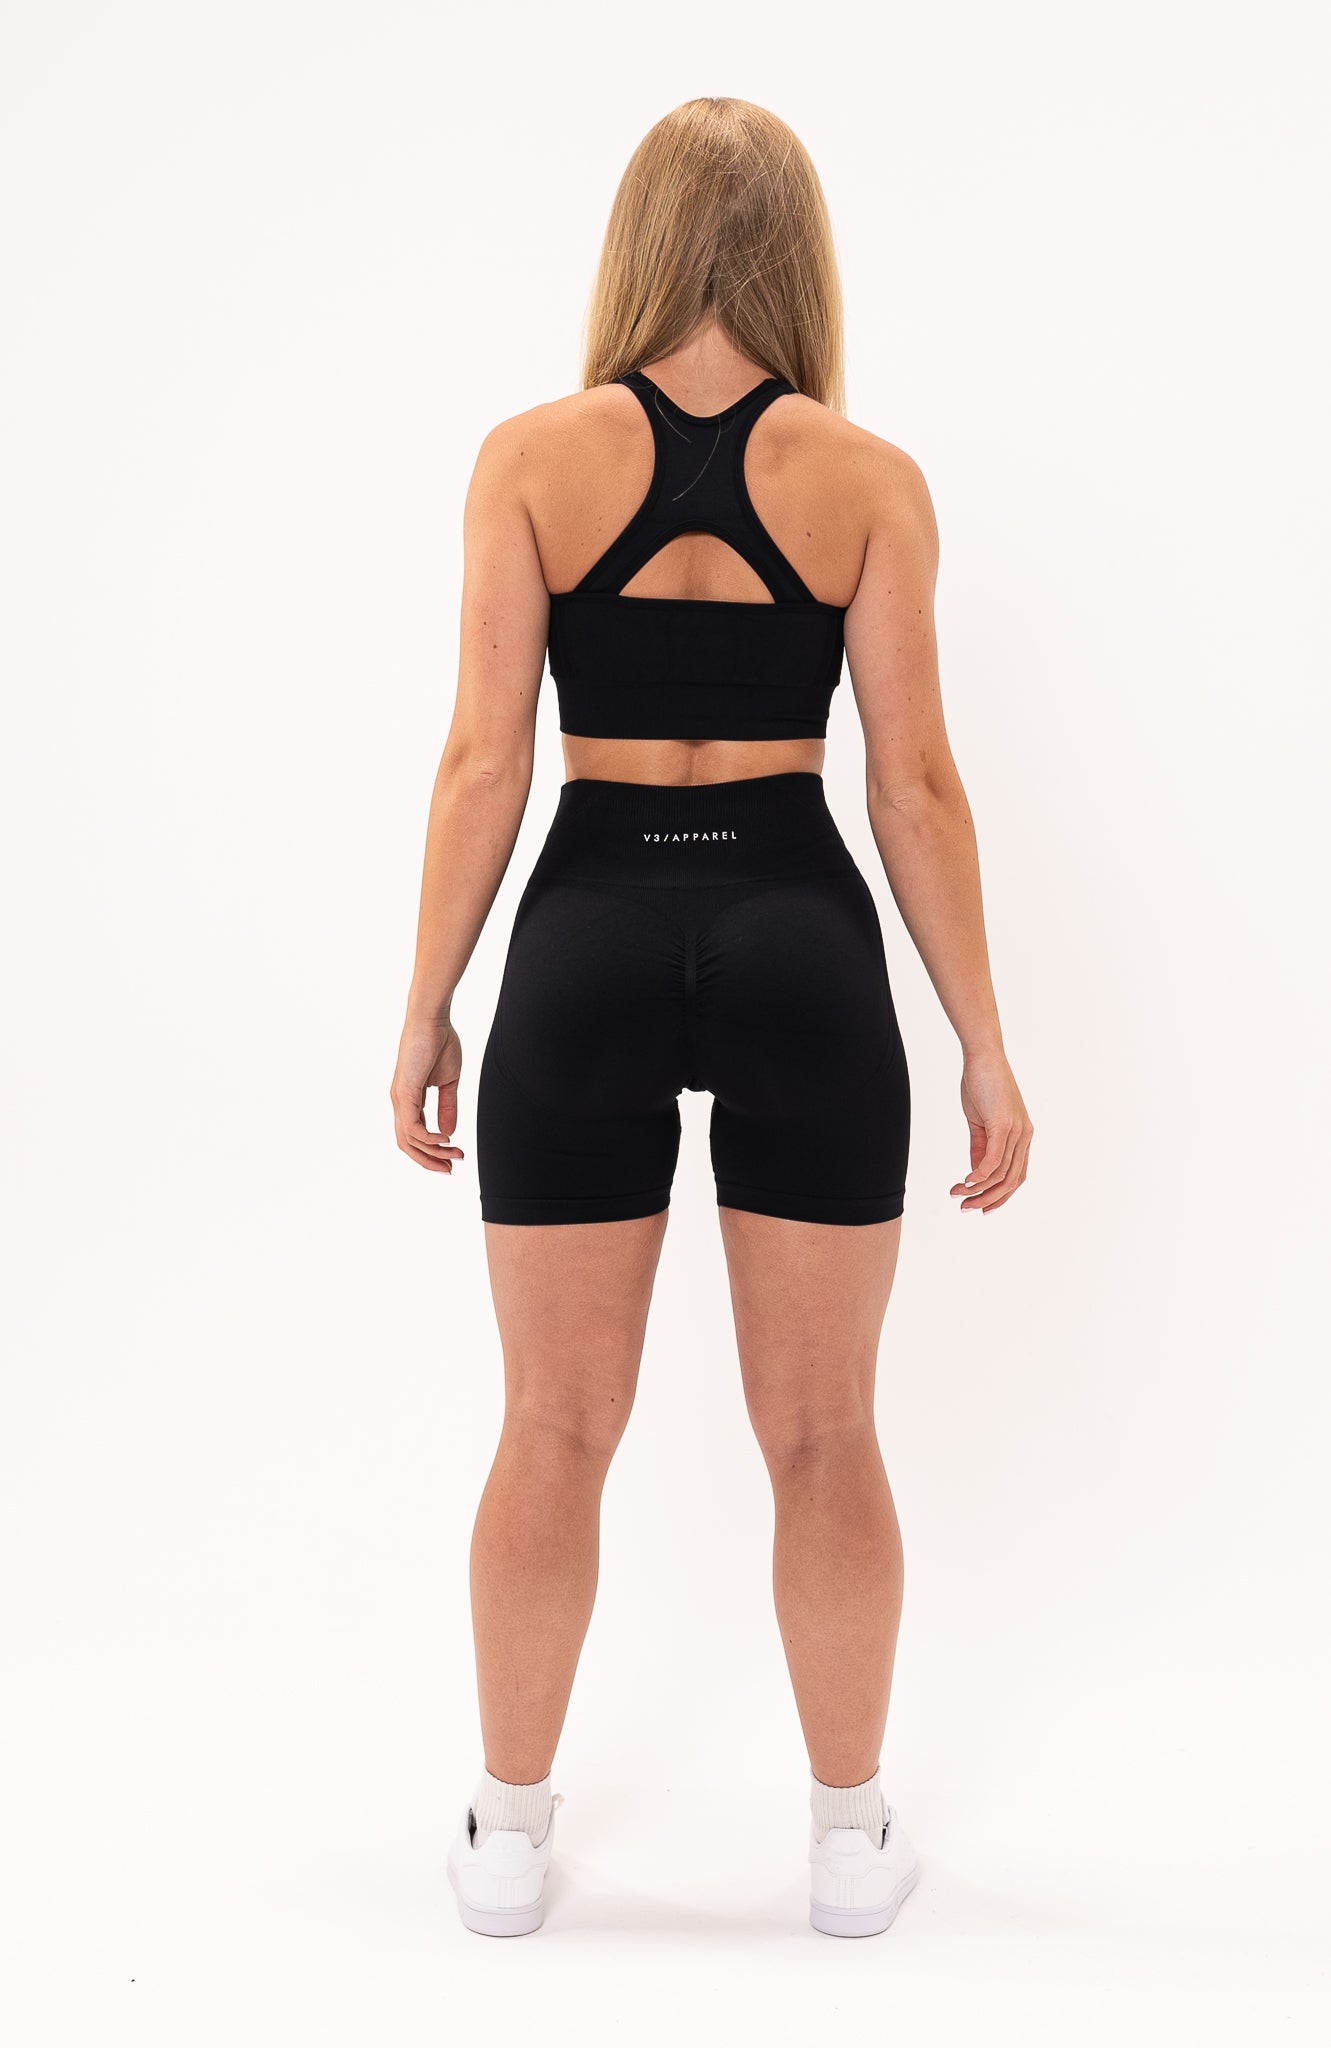 V3 Apparel Women's Tempo seamless scrunch bum shaping high waisted shorts and training sports bra in black – Squat proof 5 inch leg cycle shorts and training bra for Gym workouts training, Running, yoga, bodybuilding and bikini fitness.